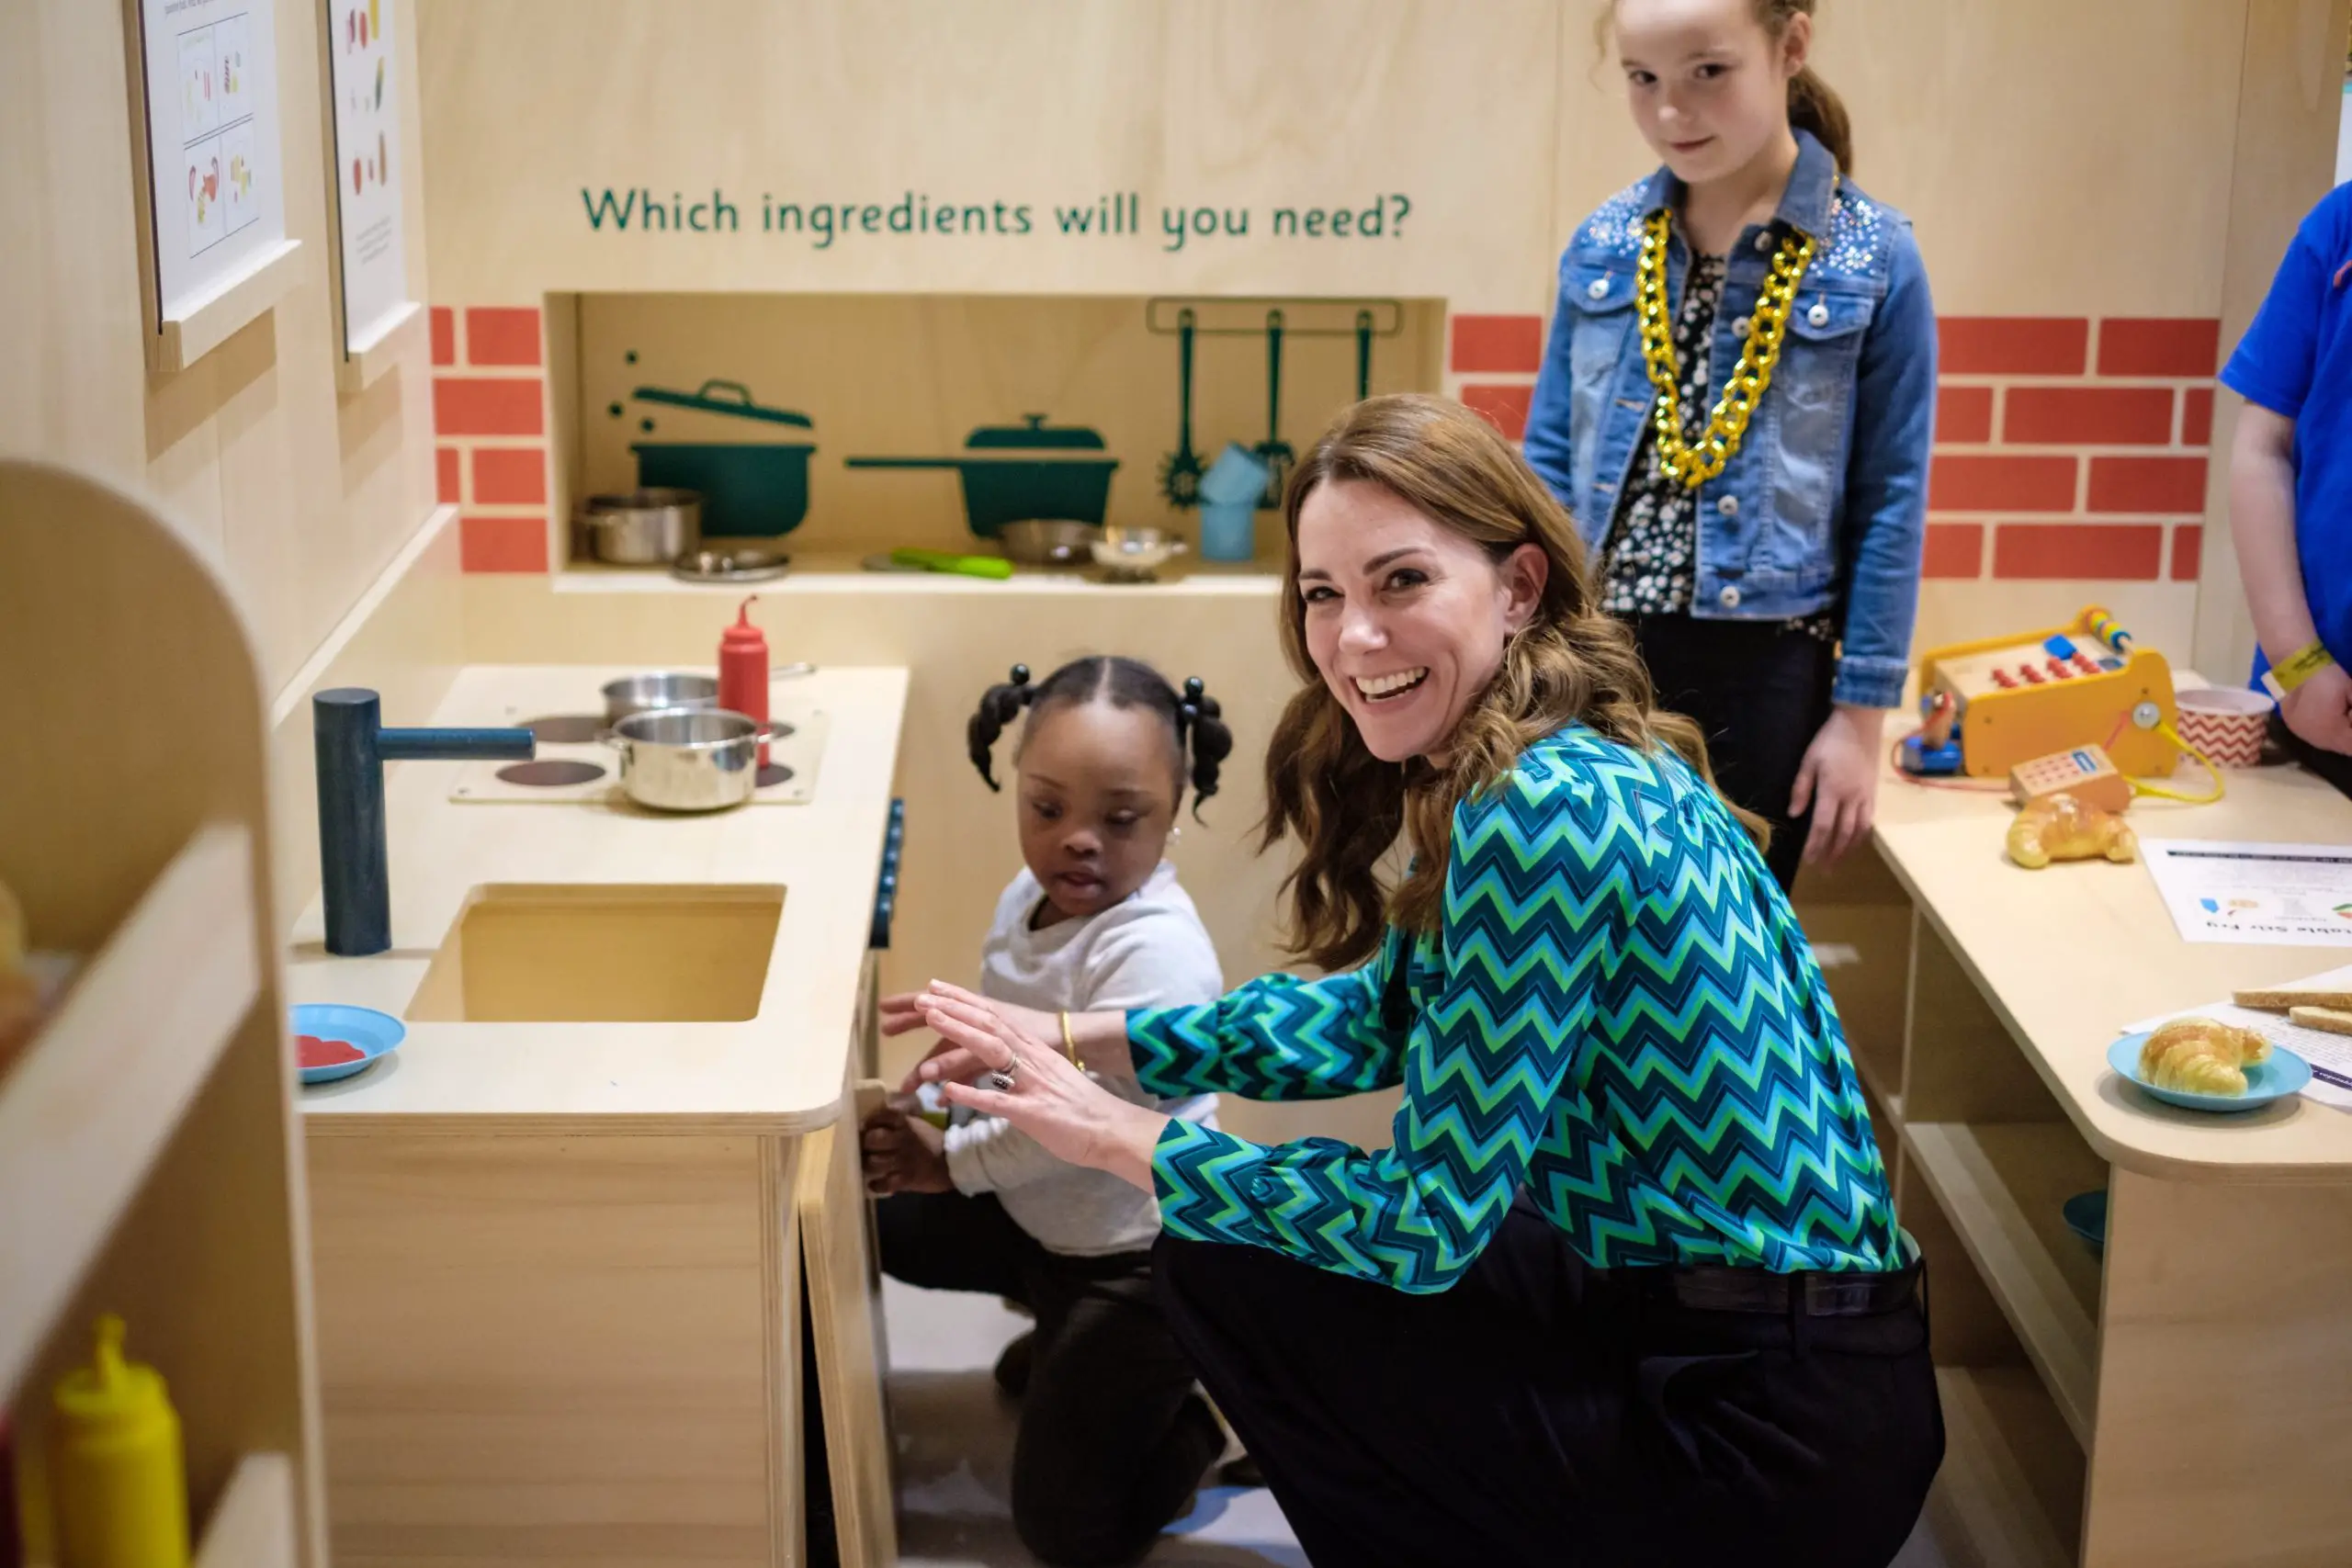 The Duchess of Cambridge launched 5 Big Questions under her Early Years Intervention Project